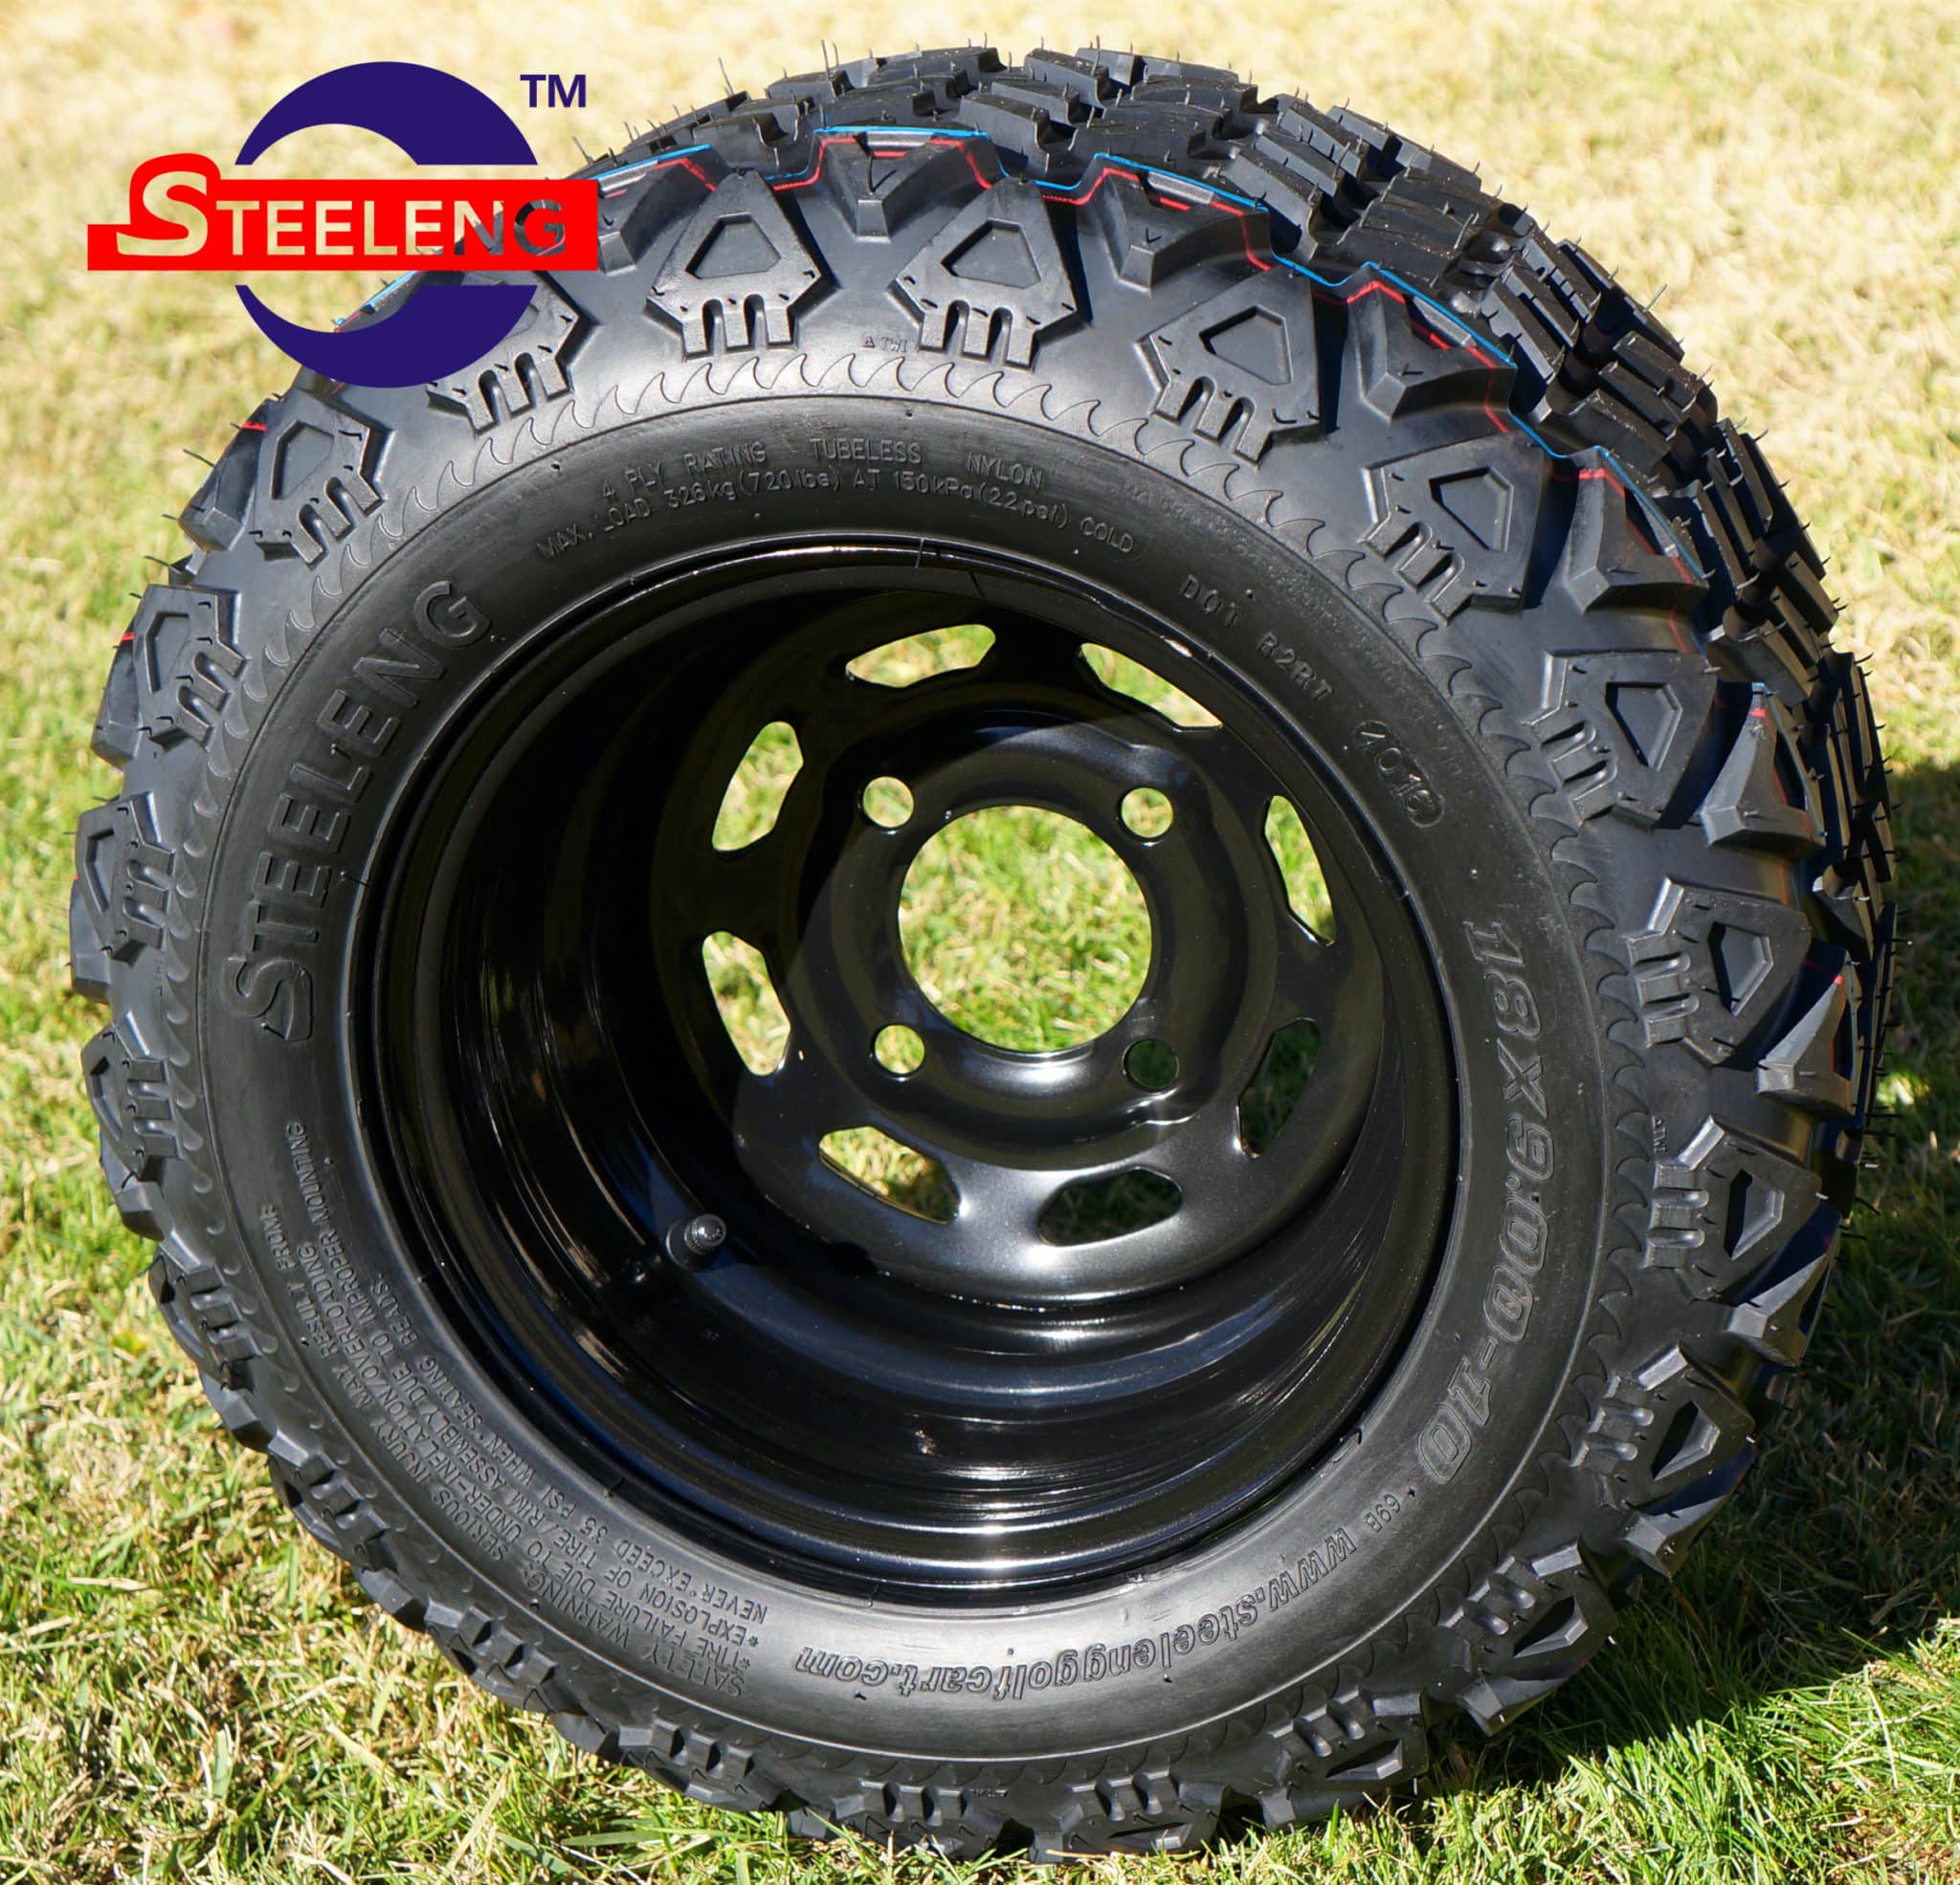 10" Black Slotted Steel Wheel & 18" x 9" -10" All Terrain Tire DOT Approved Set of 4